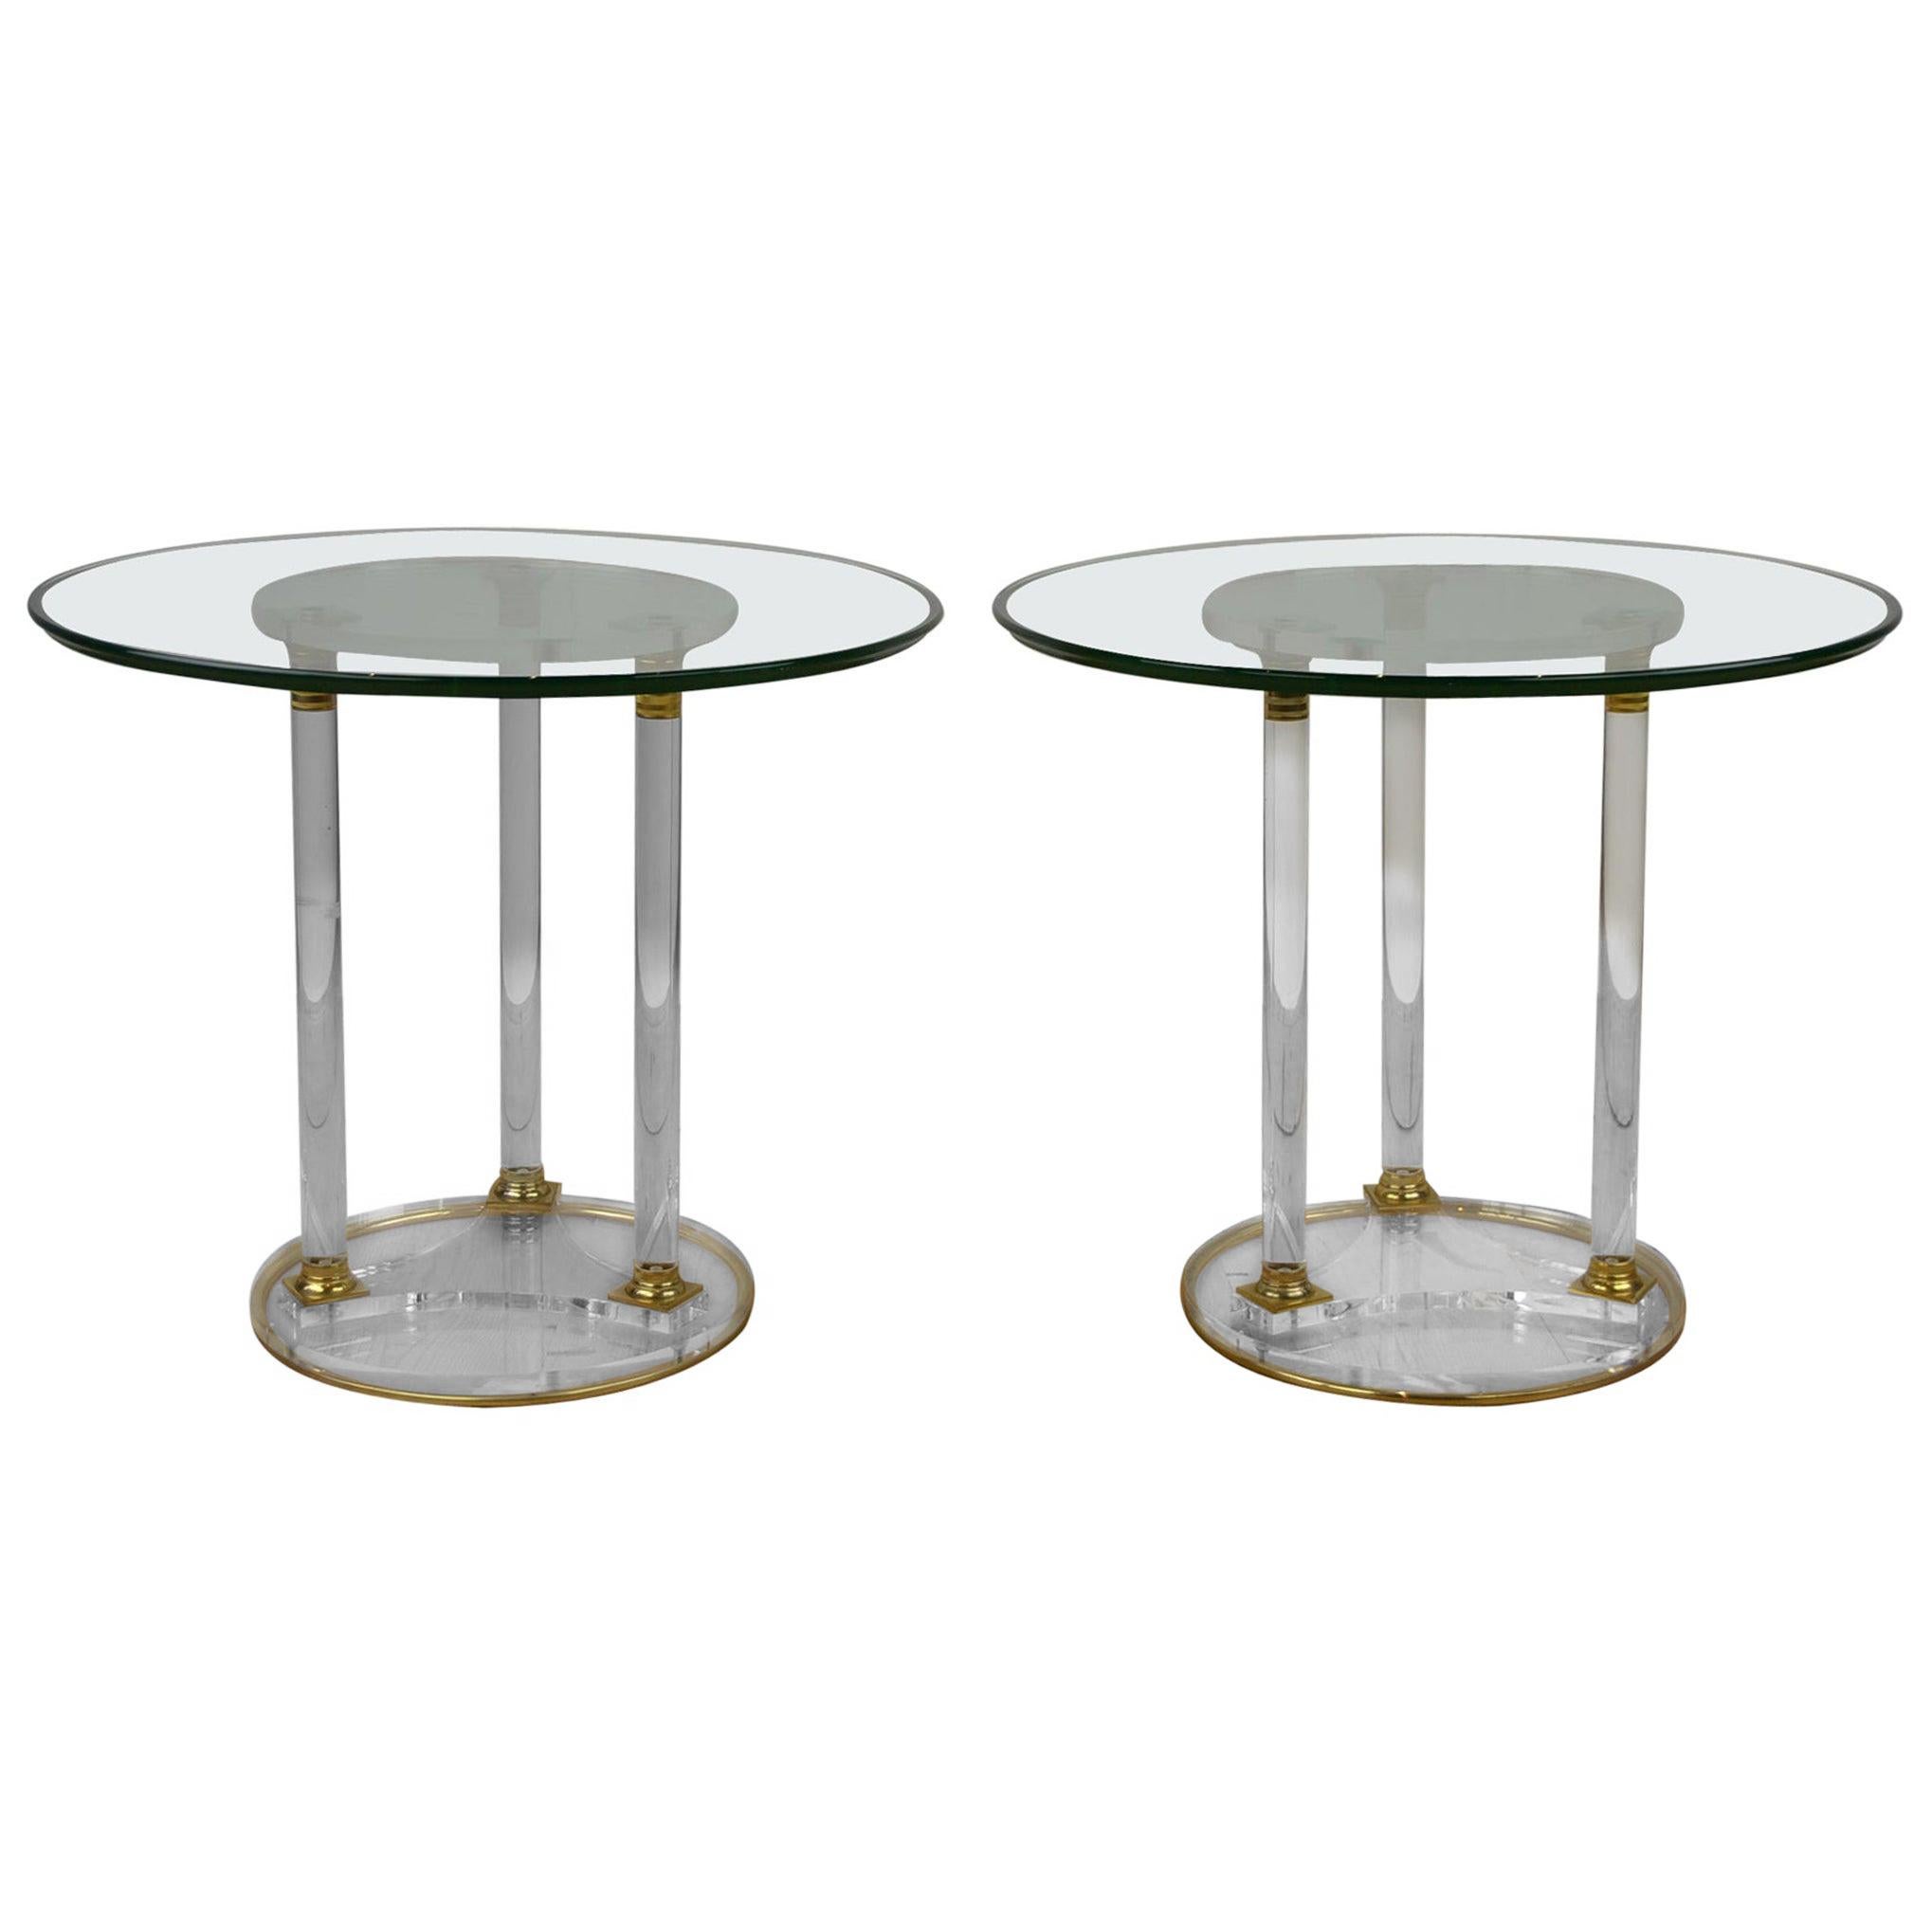 Pair of Round Lucite with Brass Side Tables, French Modern Design Tables , 1970s For Sale